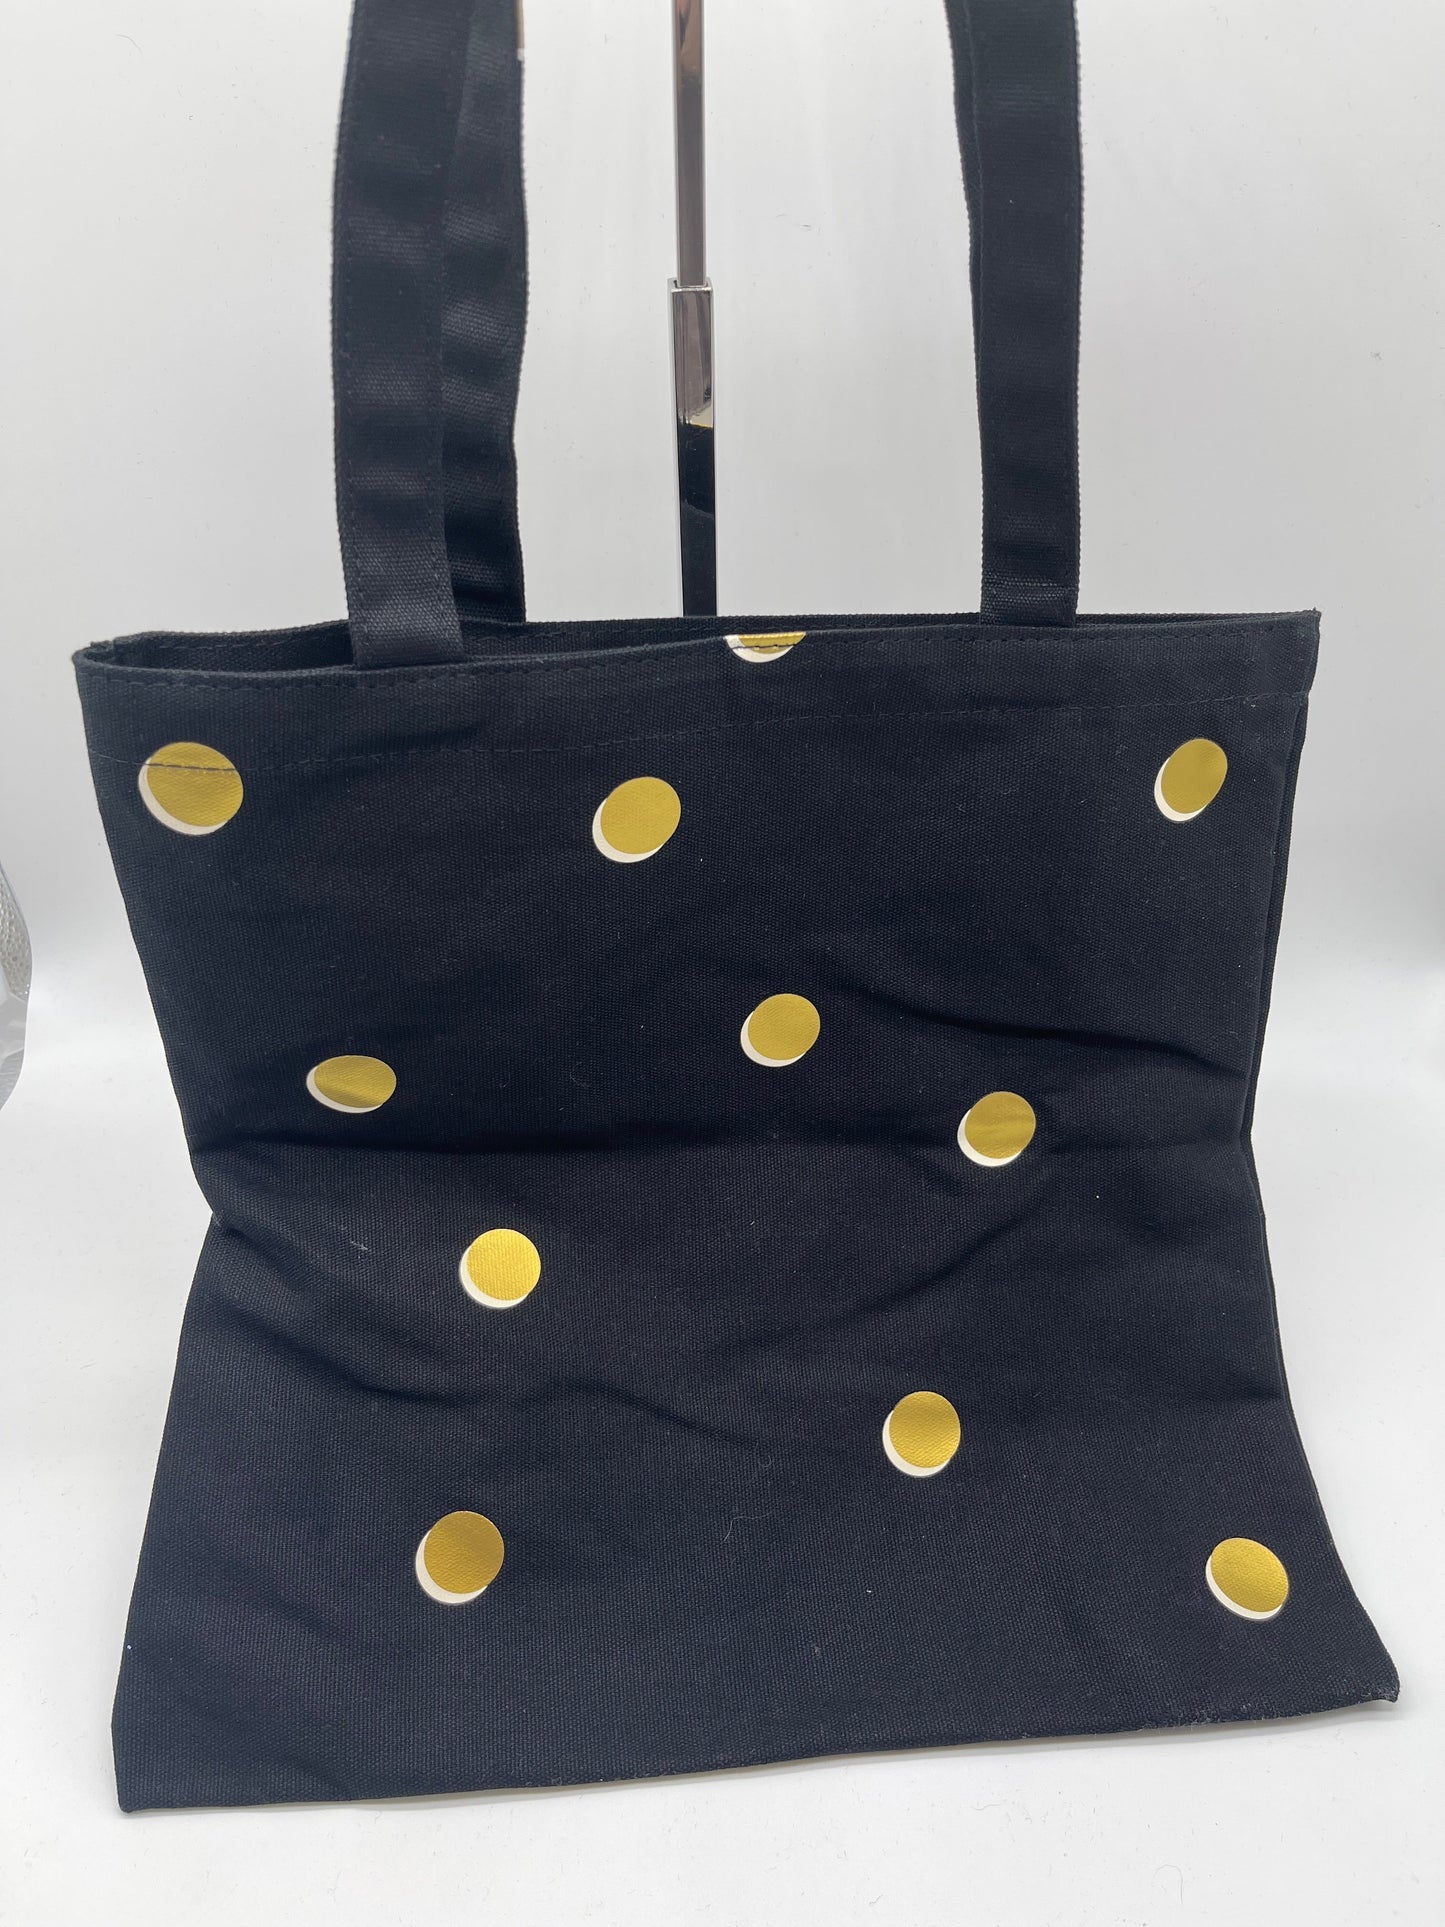 Tote Designer By Kate Spade  Size: Small